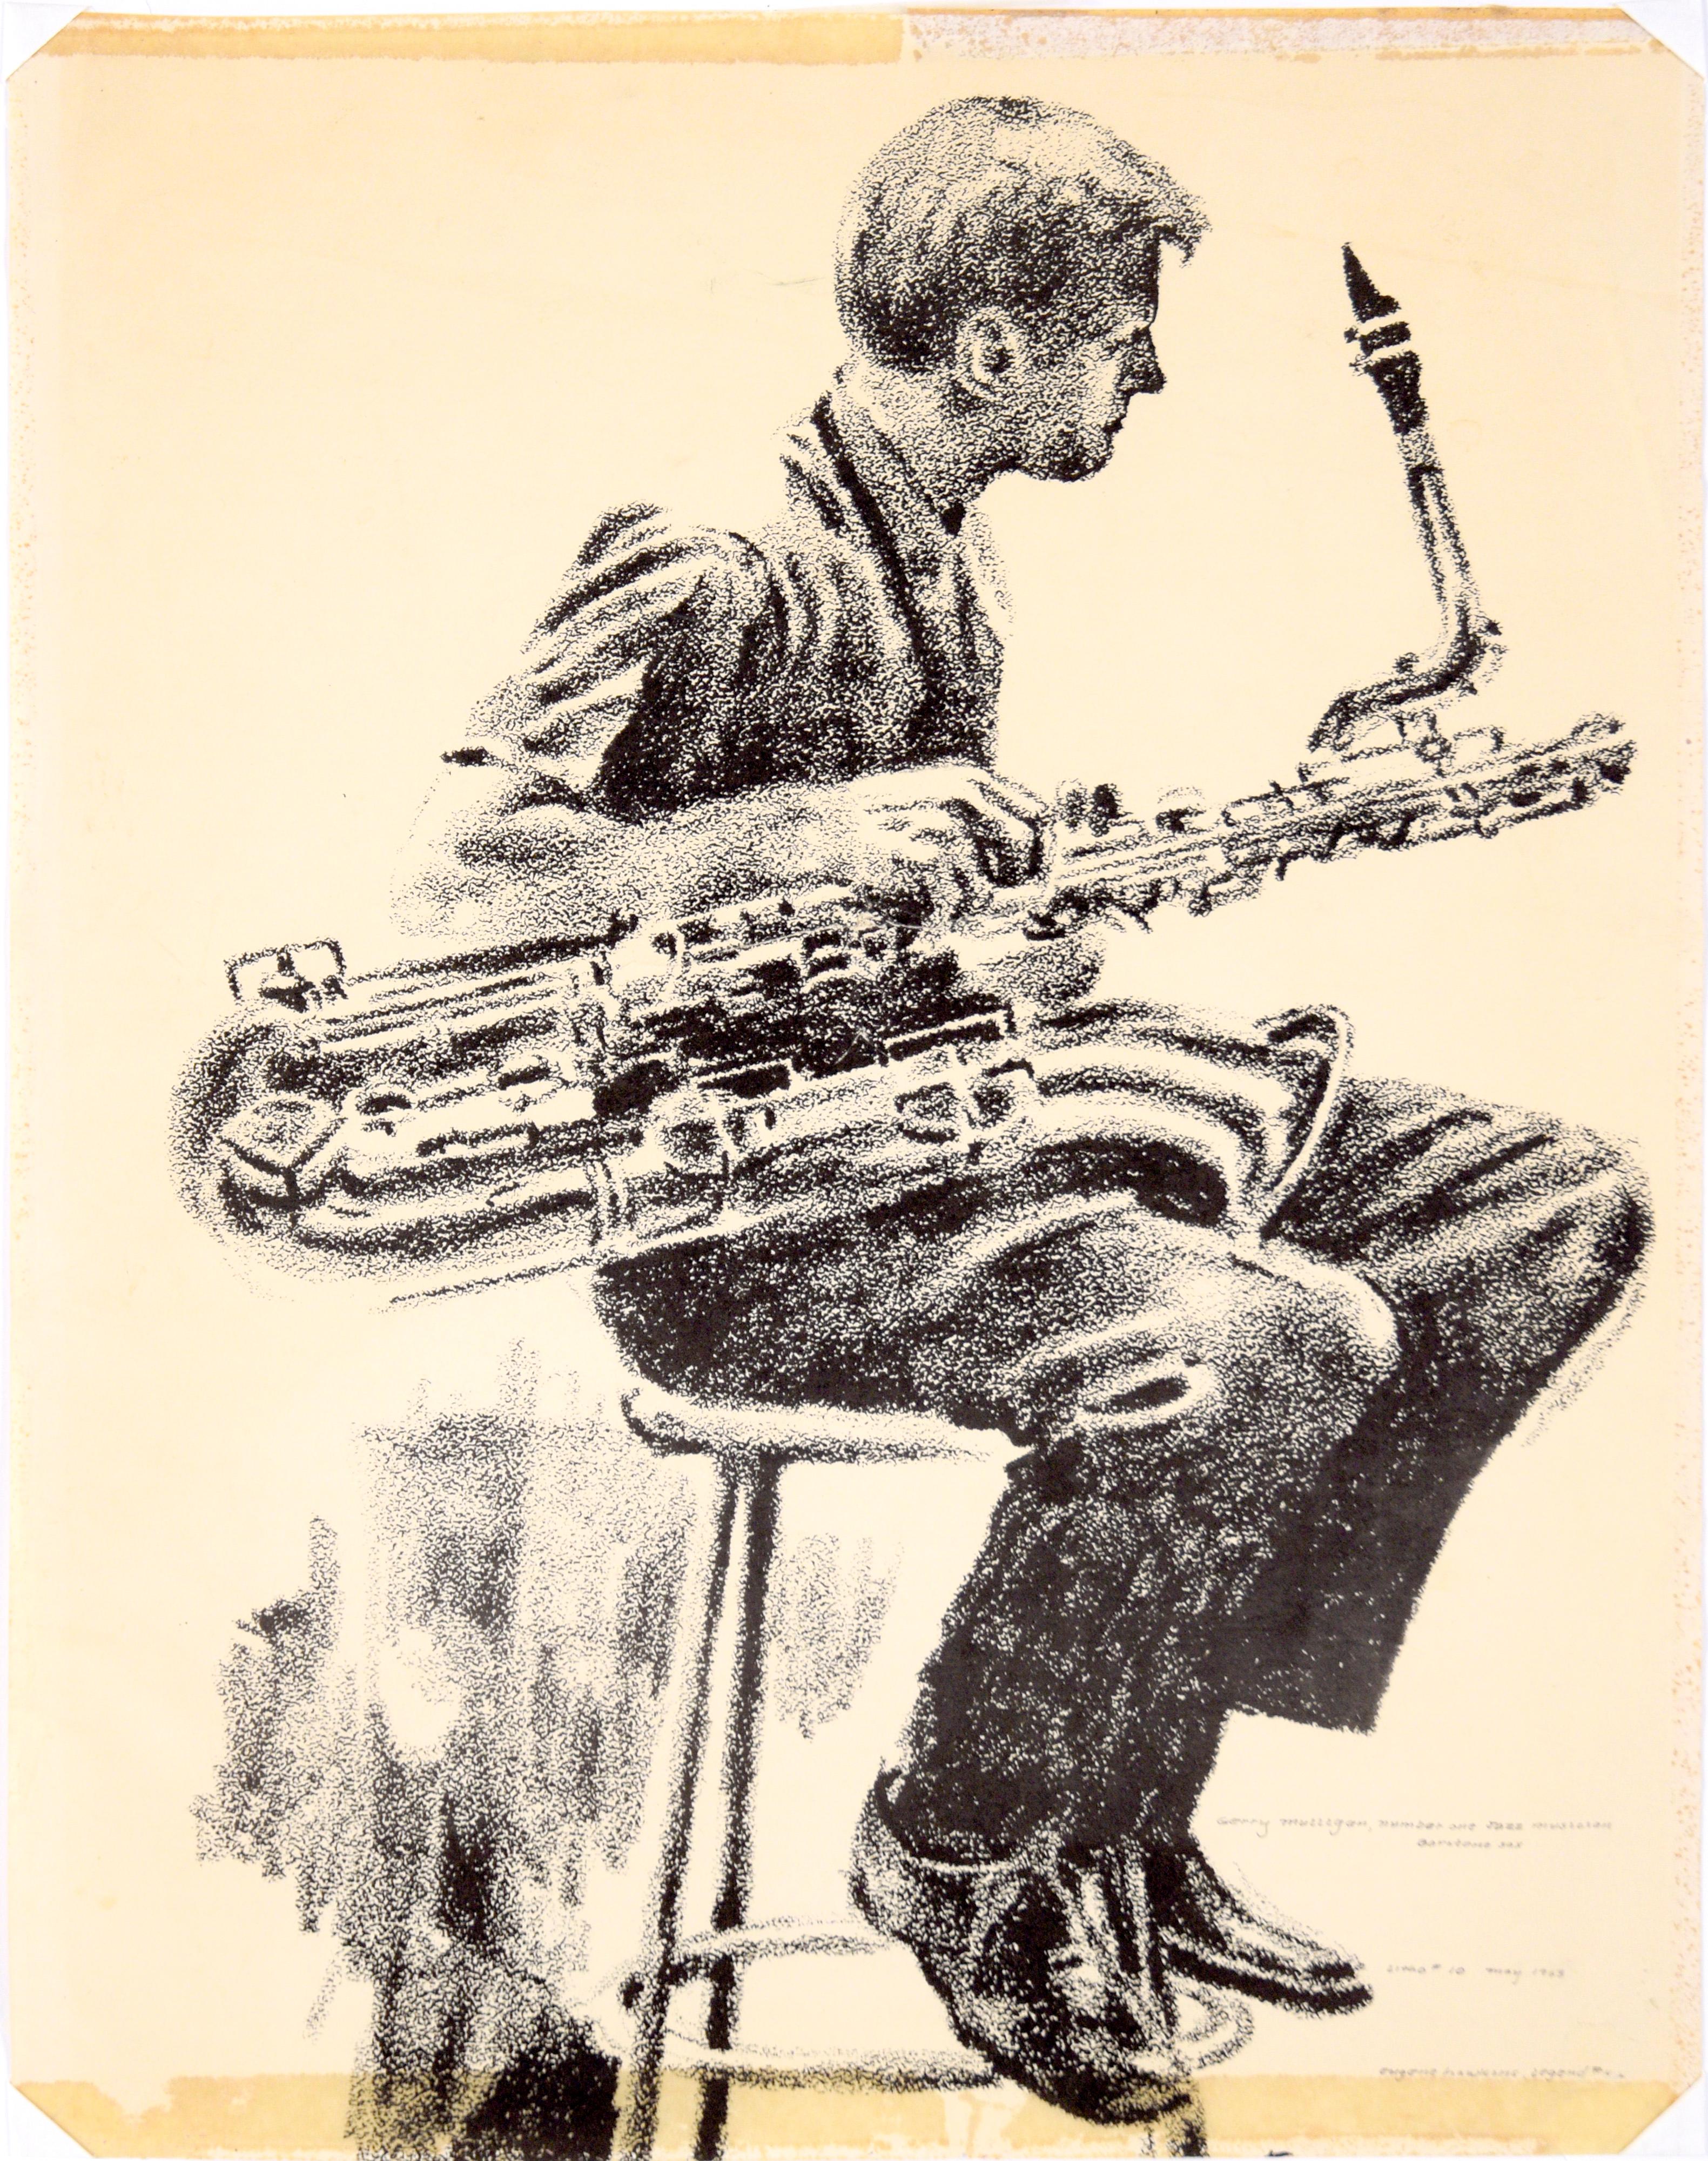 Gerry Mulligan, Baritone Sax - Rare Signed Figurative Lithograph in Ink on Paper - American Modern Print by Eugene Hawkins